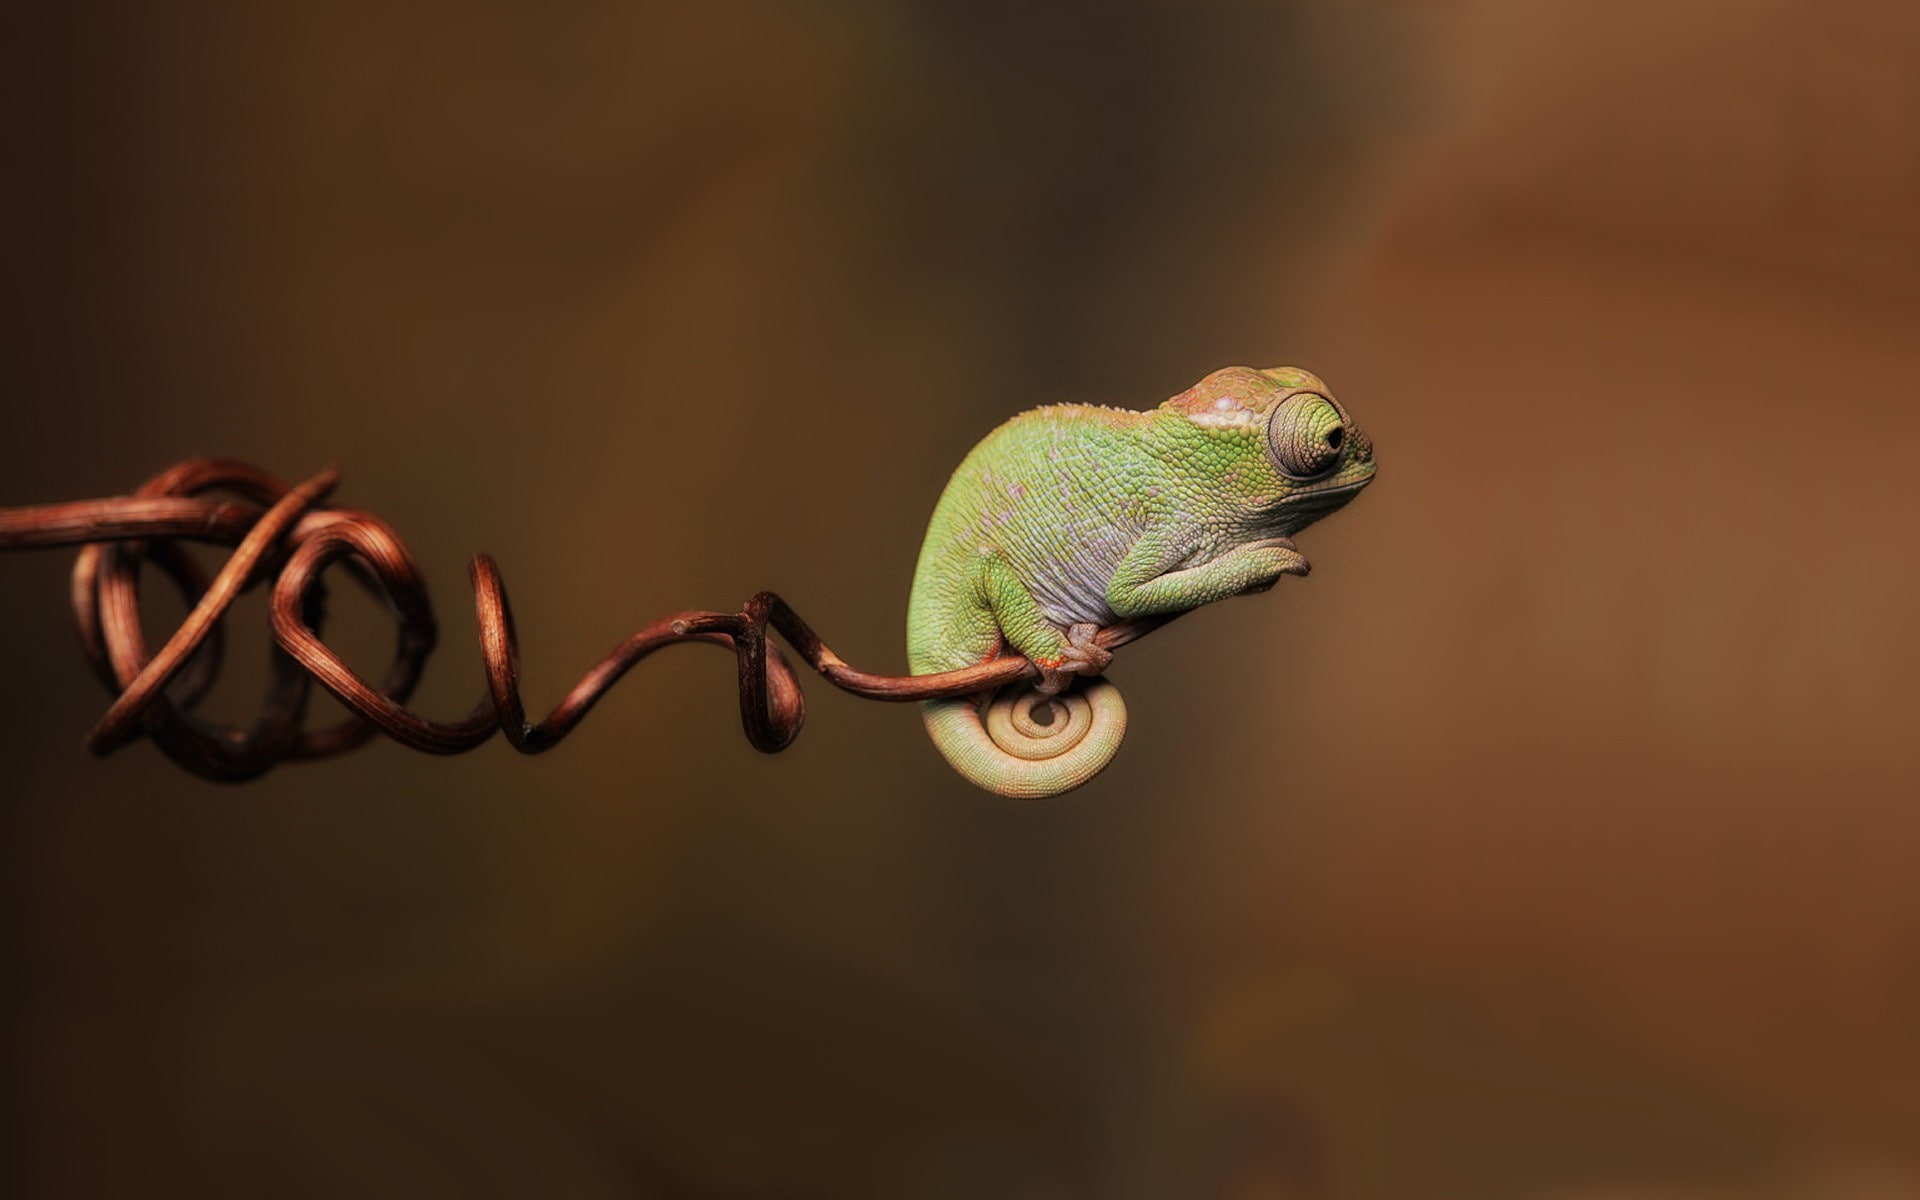 animals, branch, chameleons, reptiles, simple, twigs